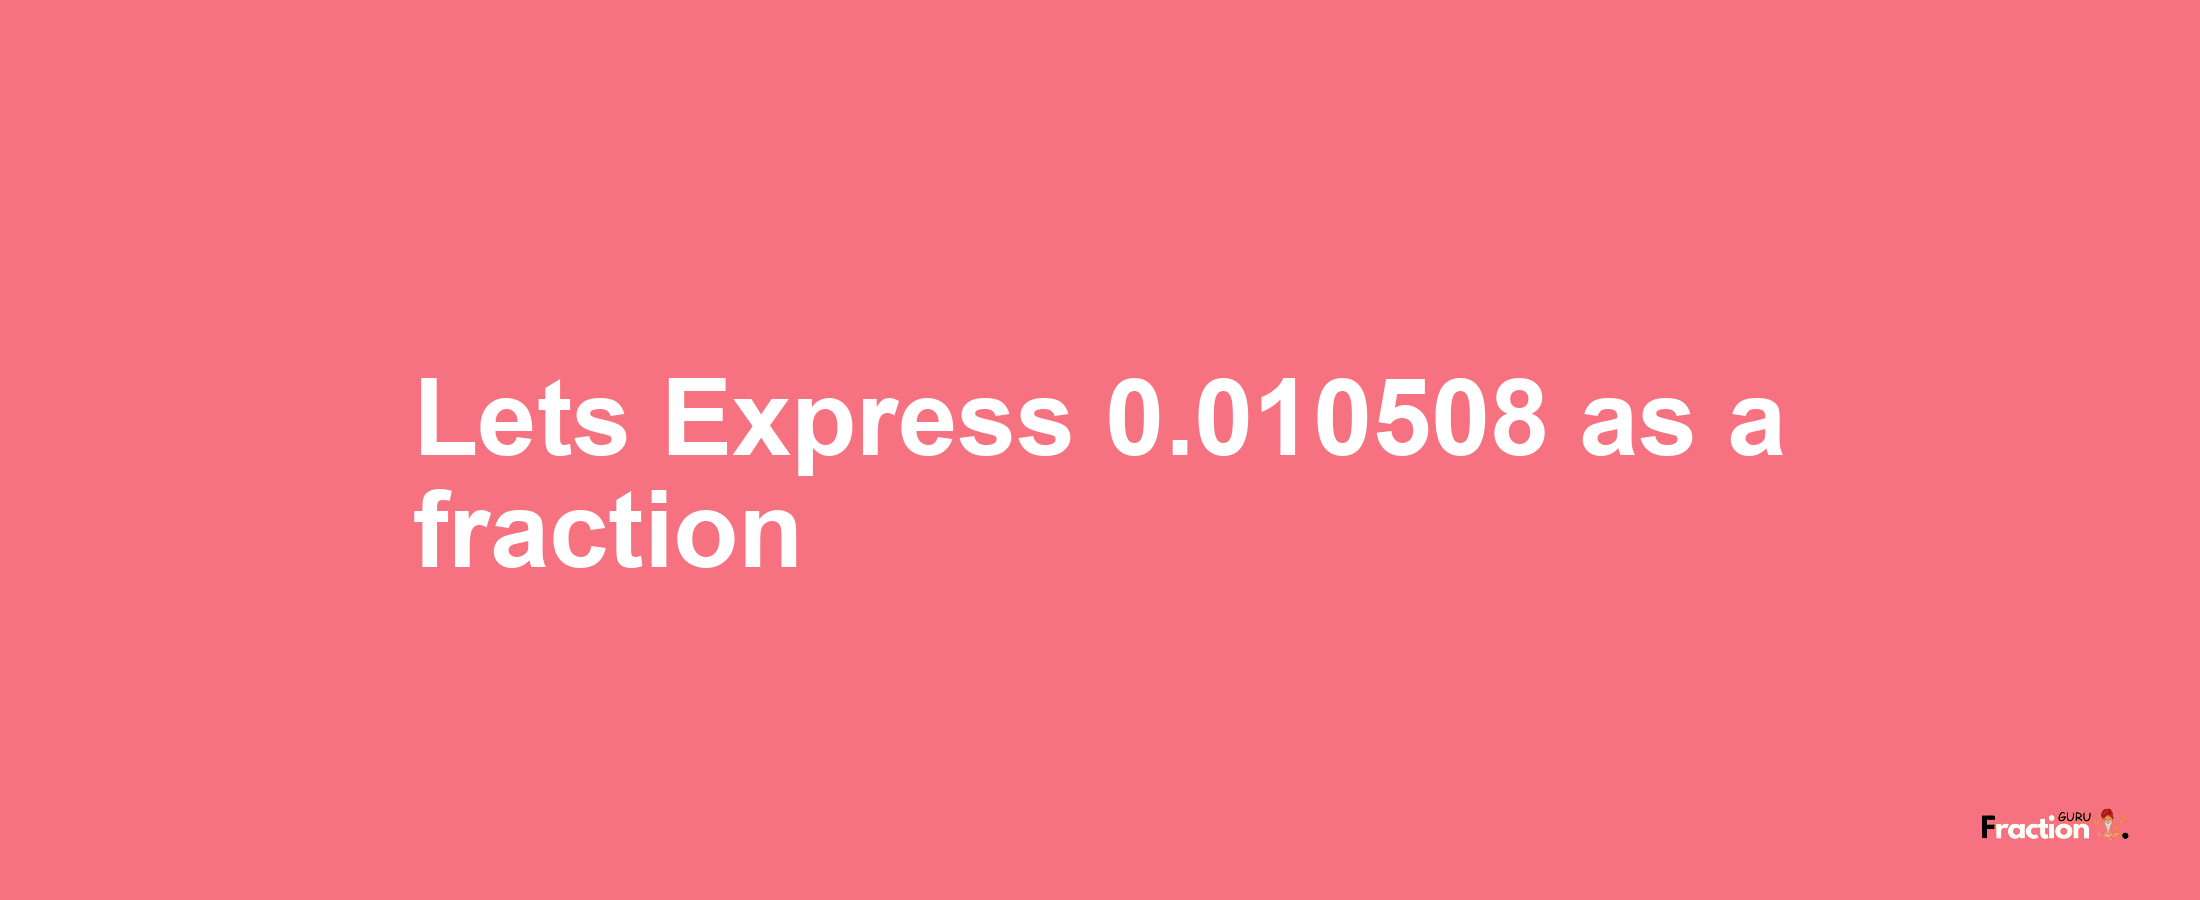 Lets Express 0.010508 as afraction